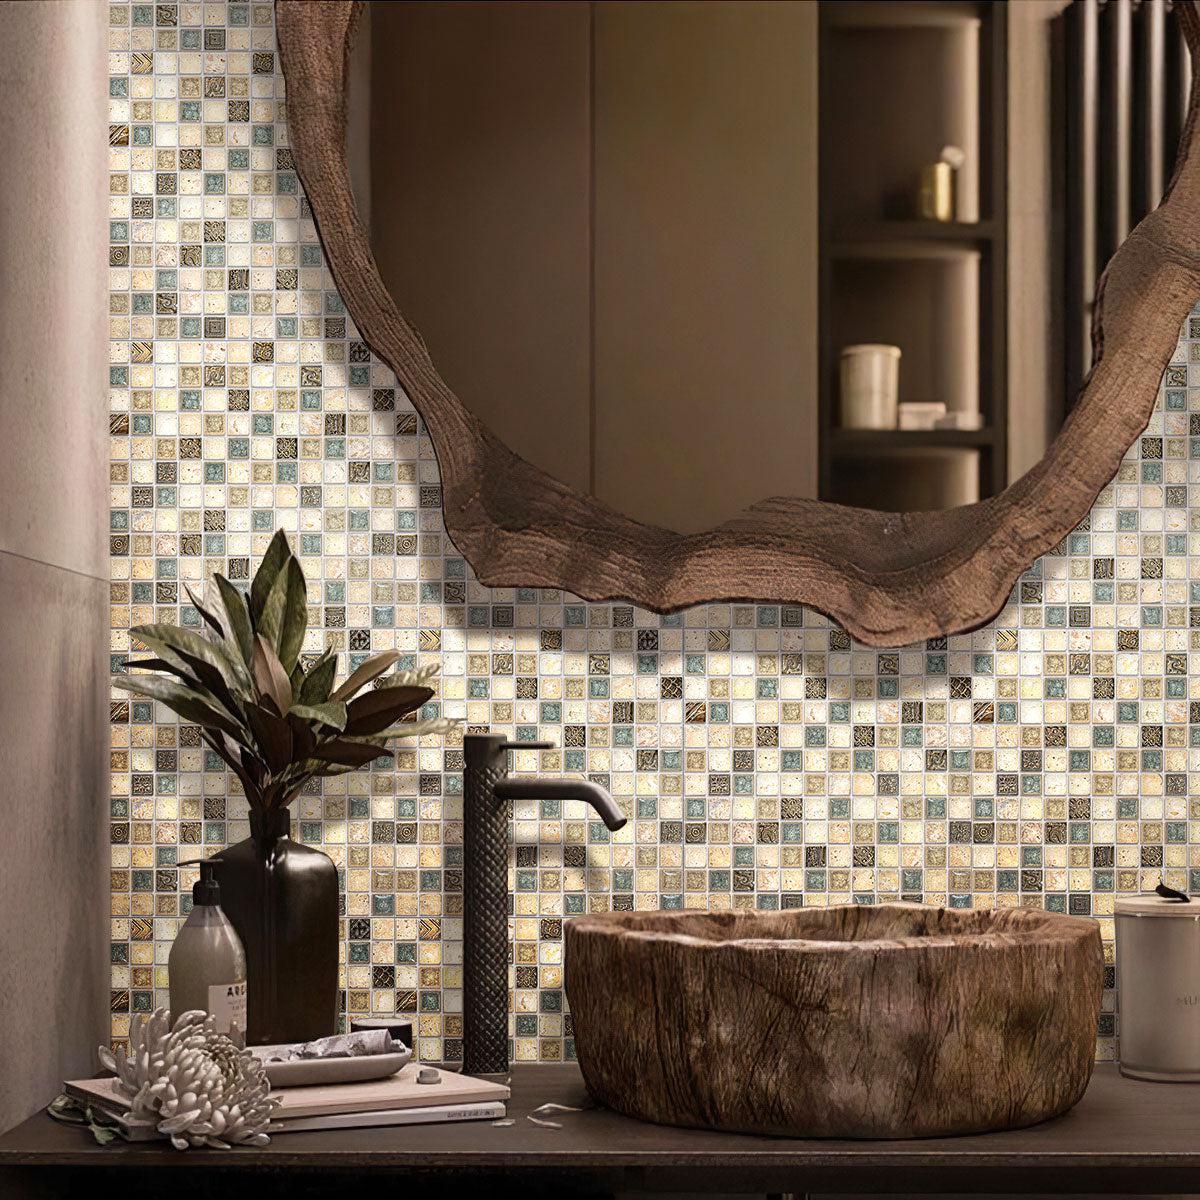 Eclectic Travertine Square Mosaic Tile Bathroom Wall